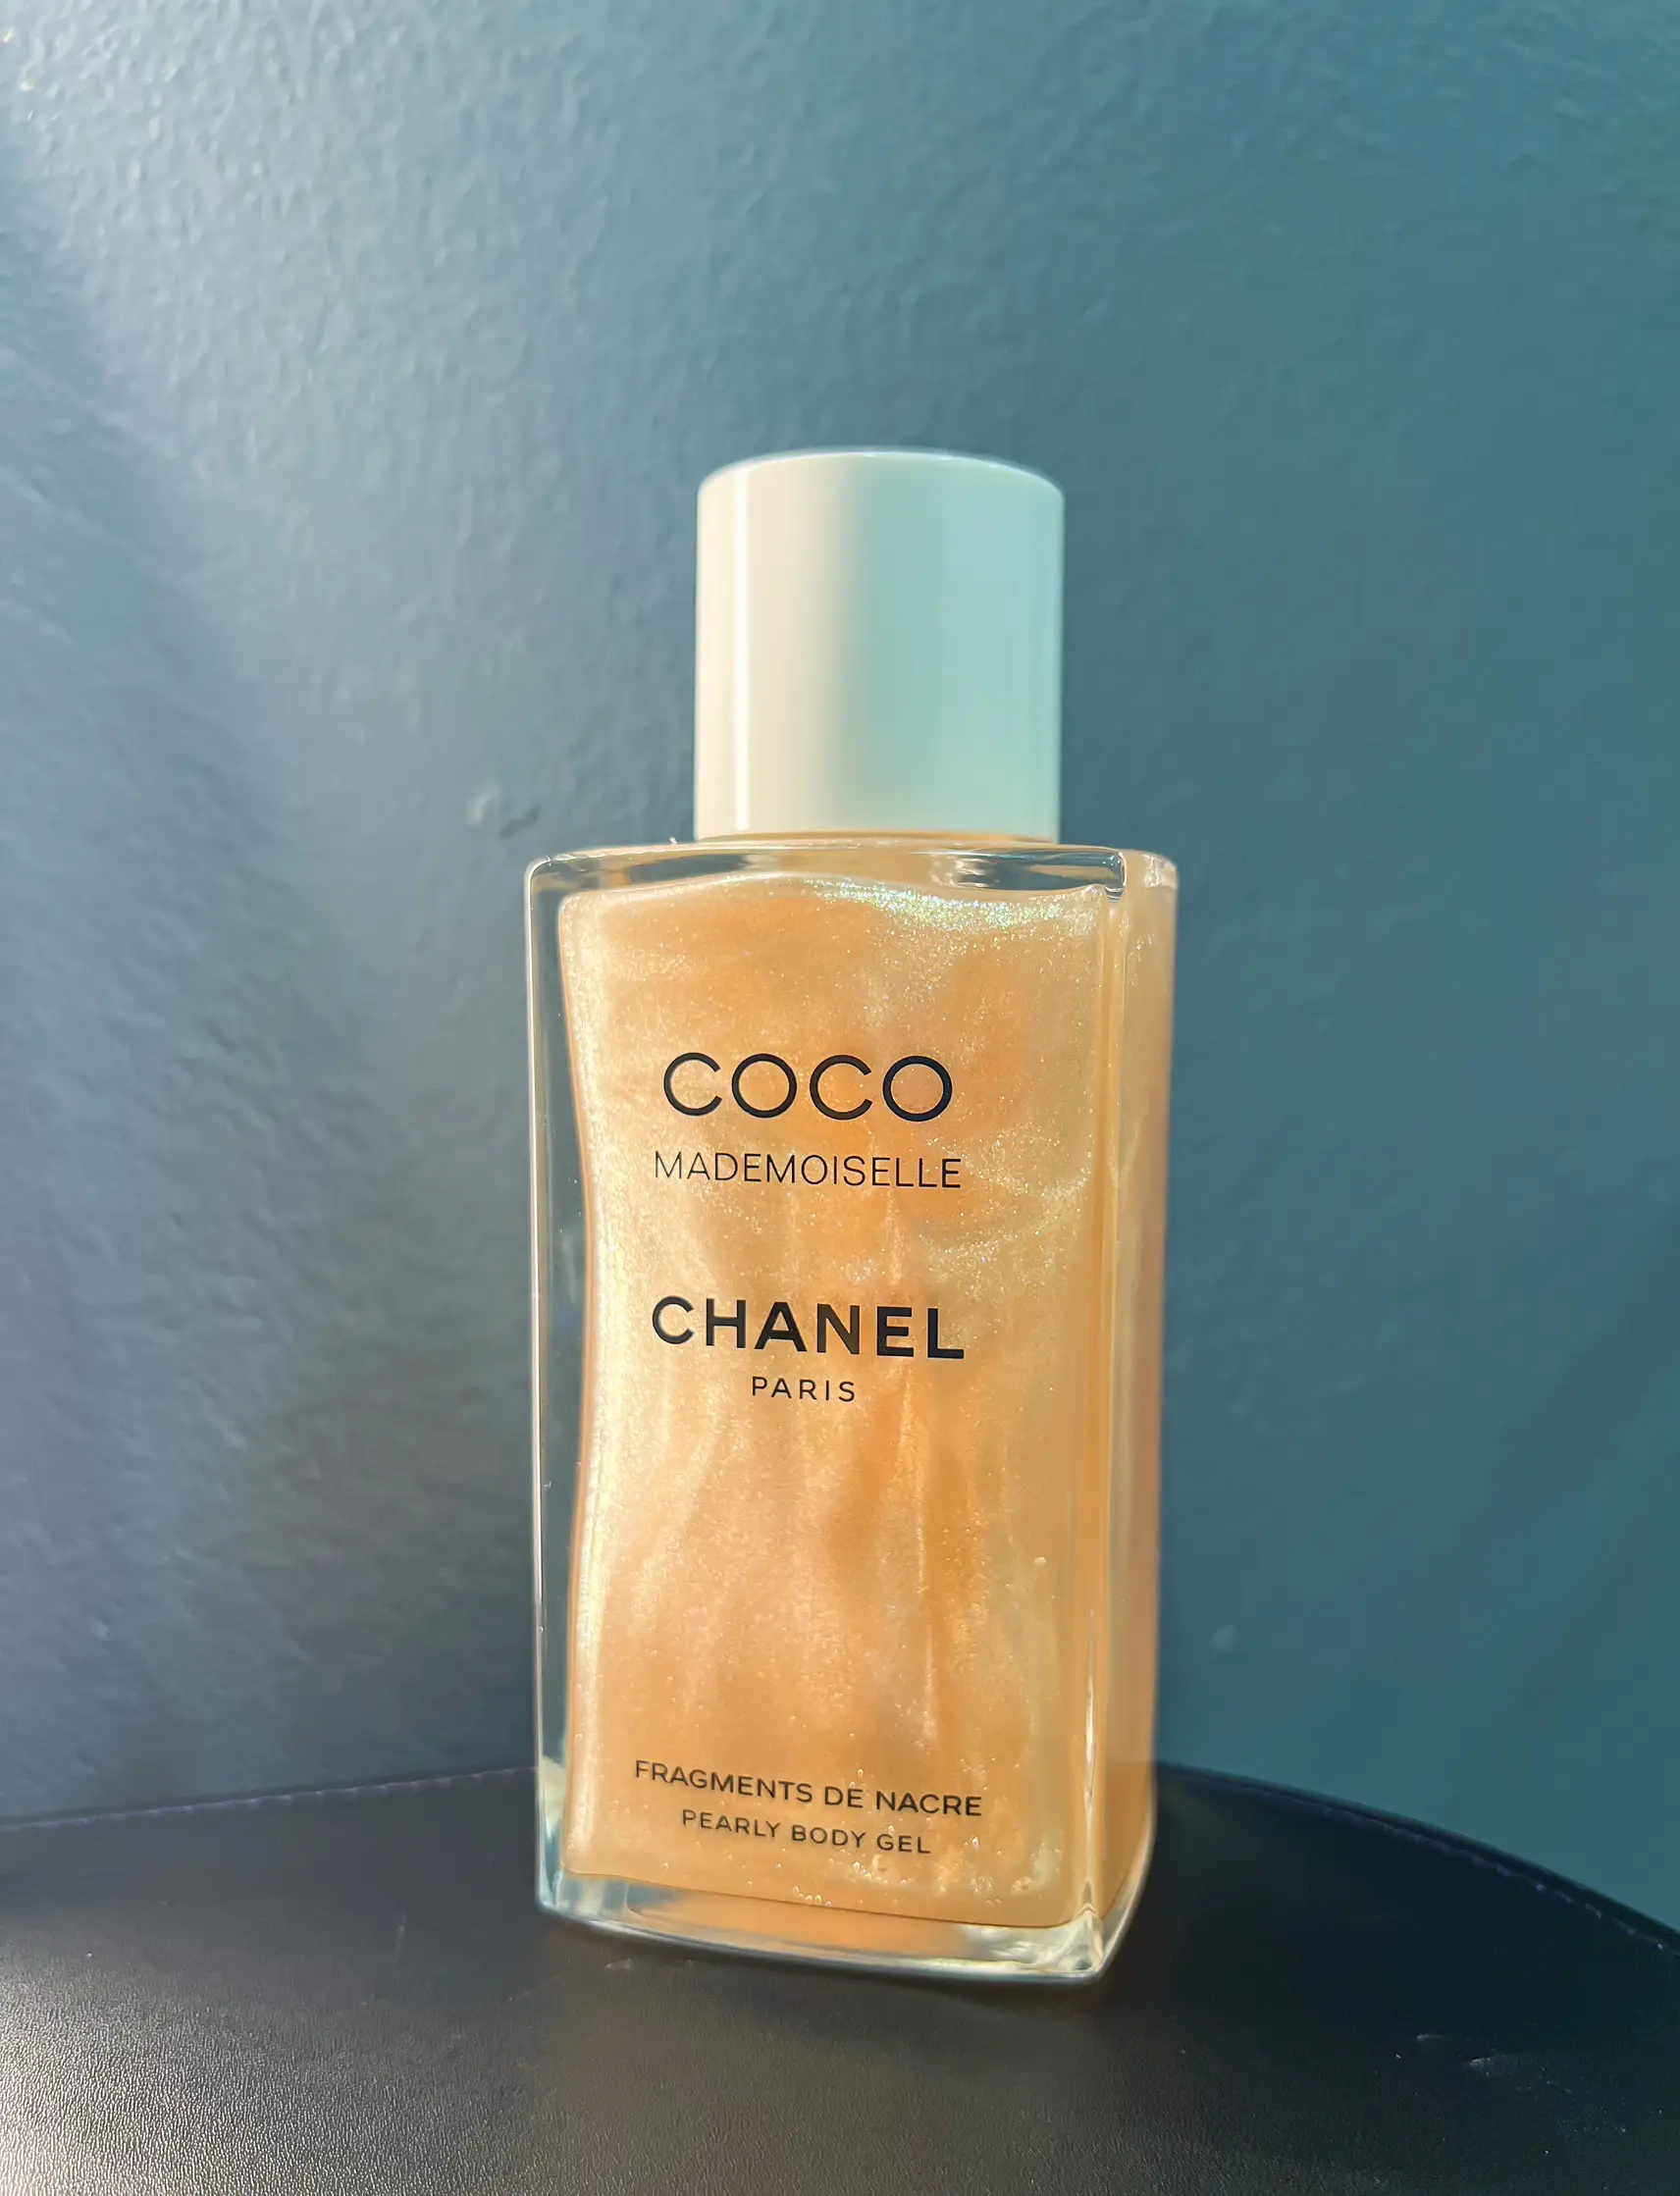 What is CHANEL's BODY GEL or BODY OIL?, Gallery posted by Siriwan ✿